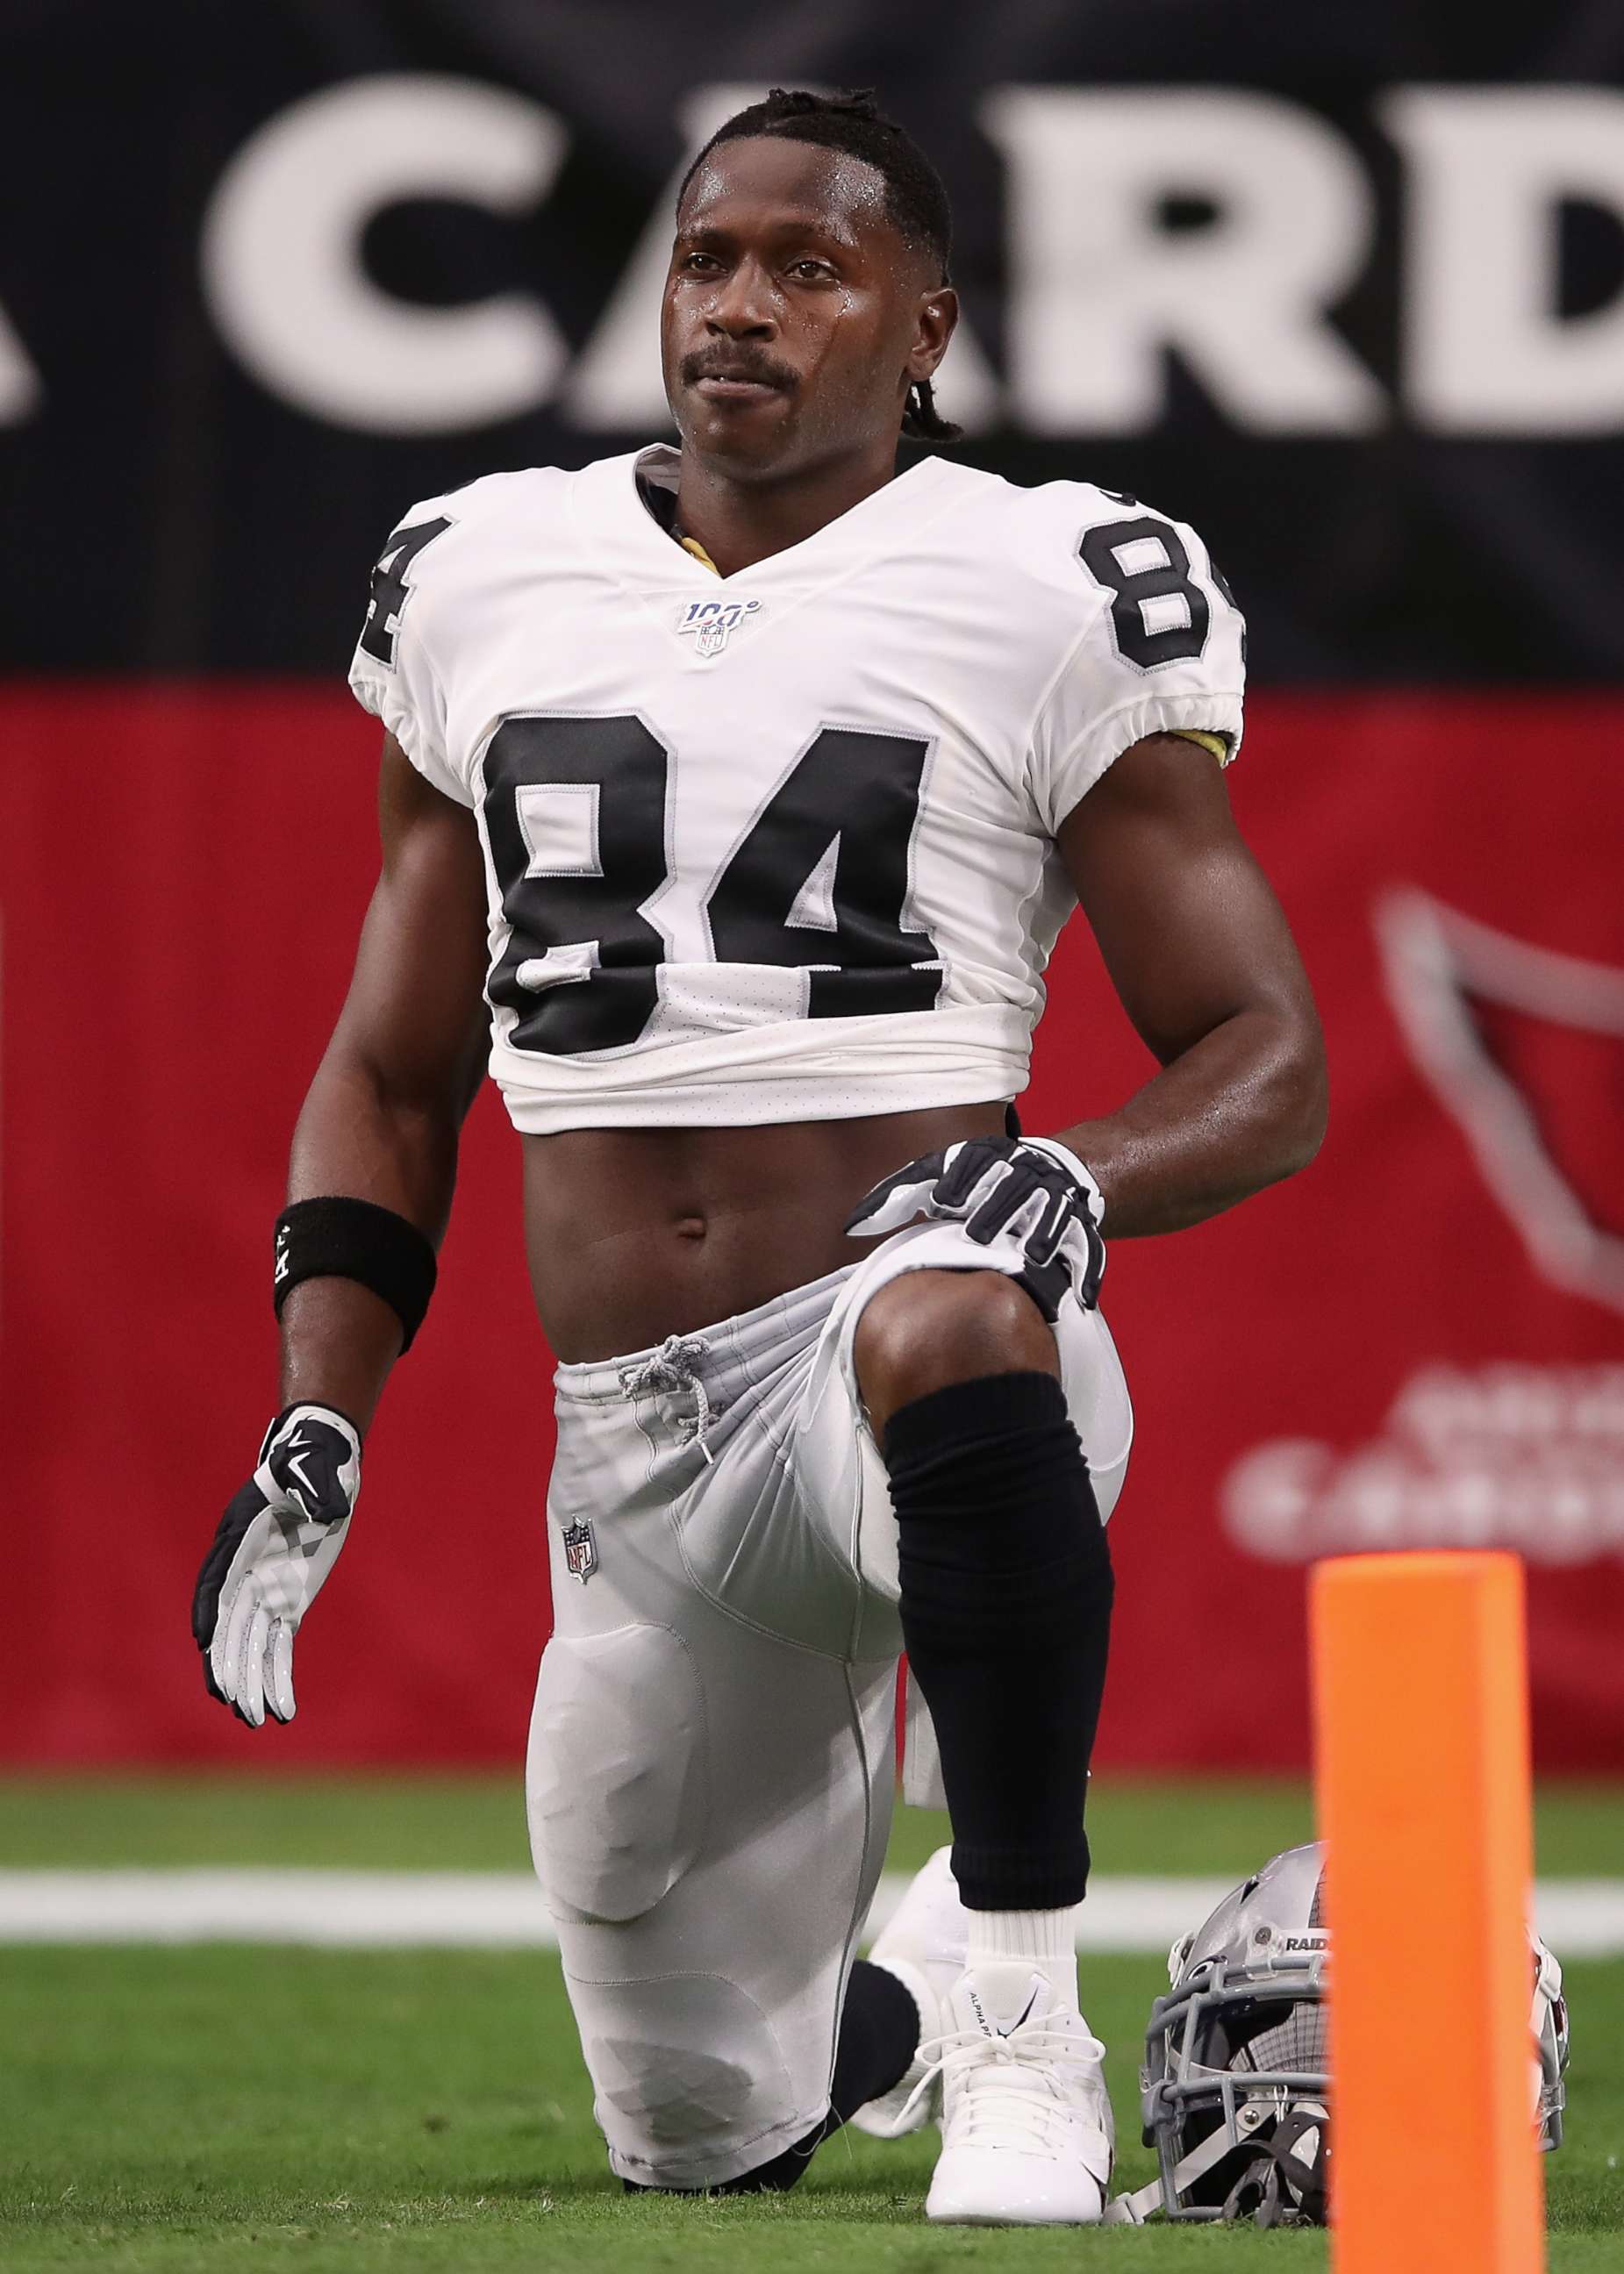 PHOTO: Wide receiver Antonio Brown of the Oakland Raiders warms up before the NFL preseason game against the Arizona Cardinals at State Farm Stadium on Aug. 15, 2019 in Glendale, Ariz.